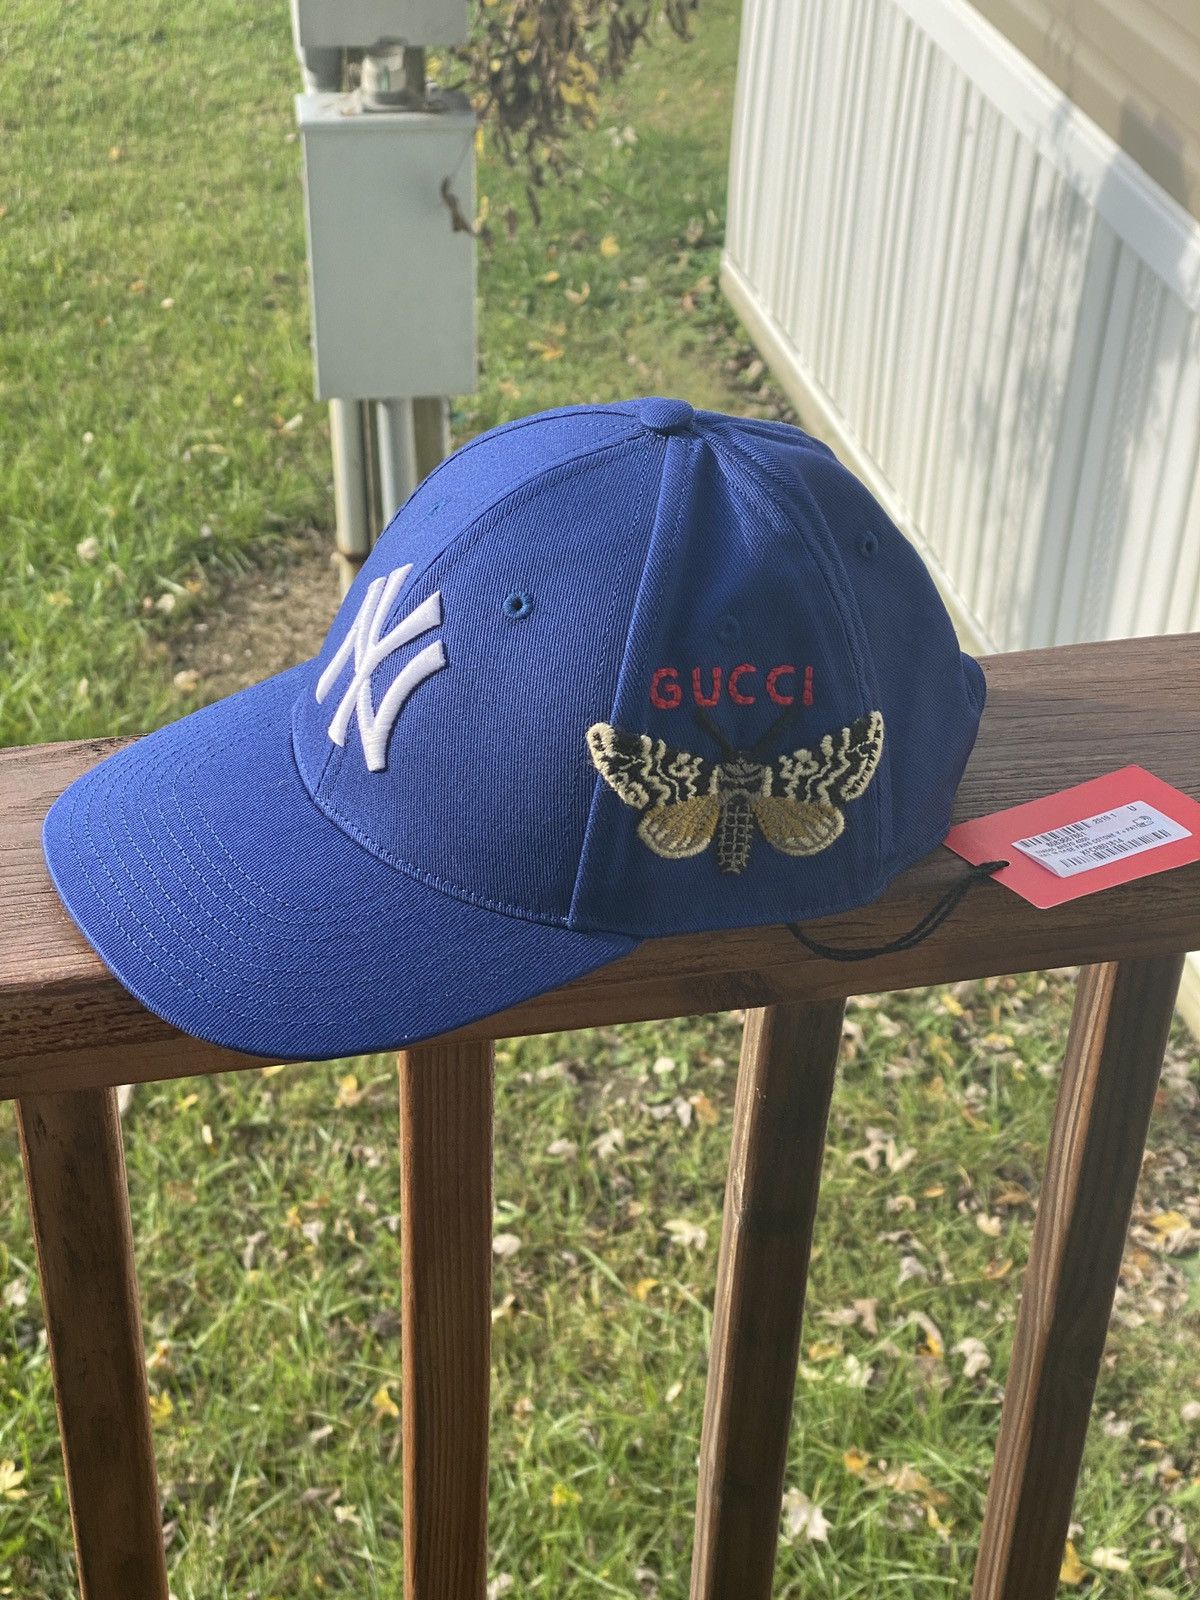 New Gucci New York Yankees Baseball Cap Butterfly Embroidery